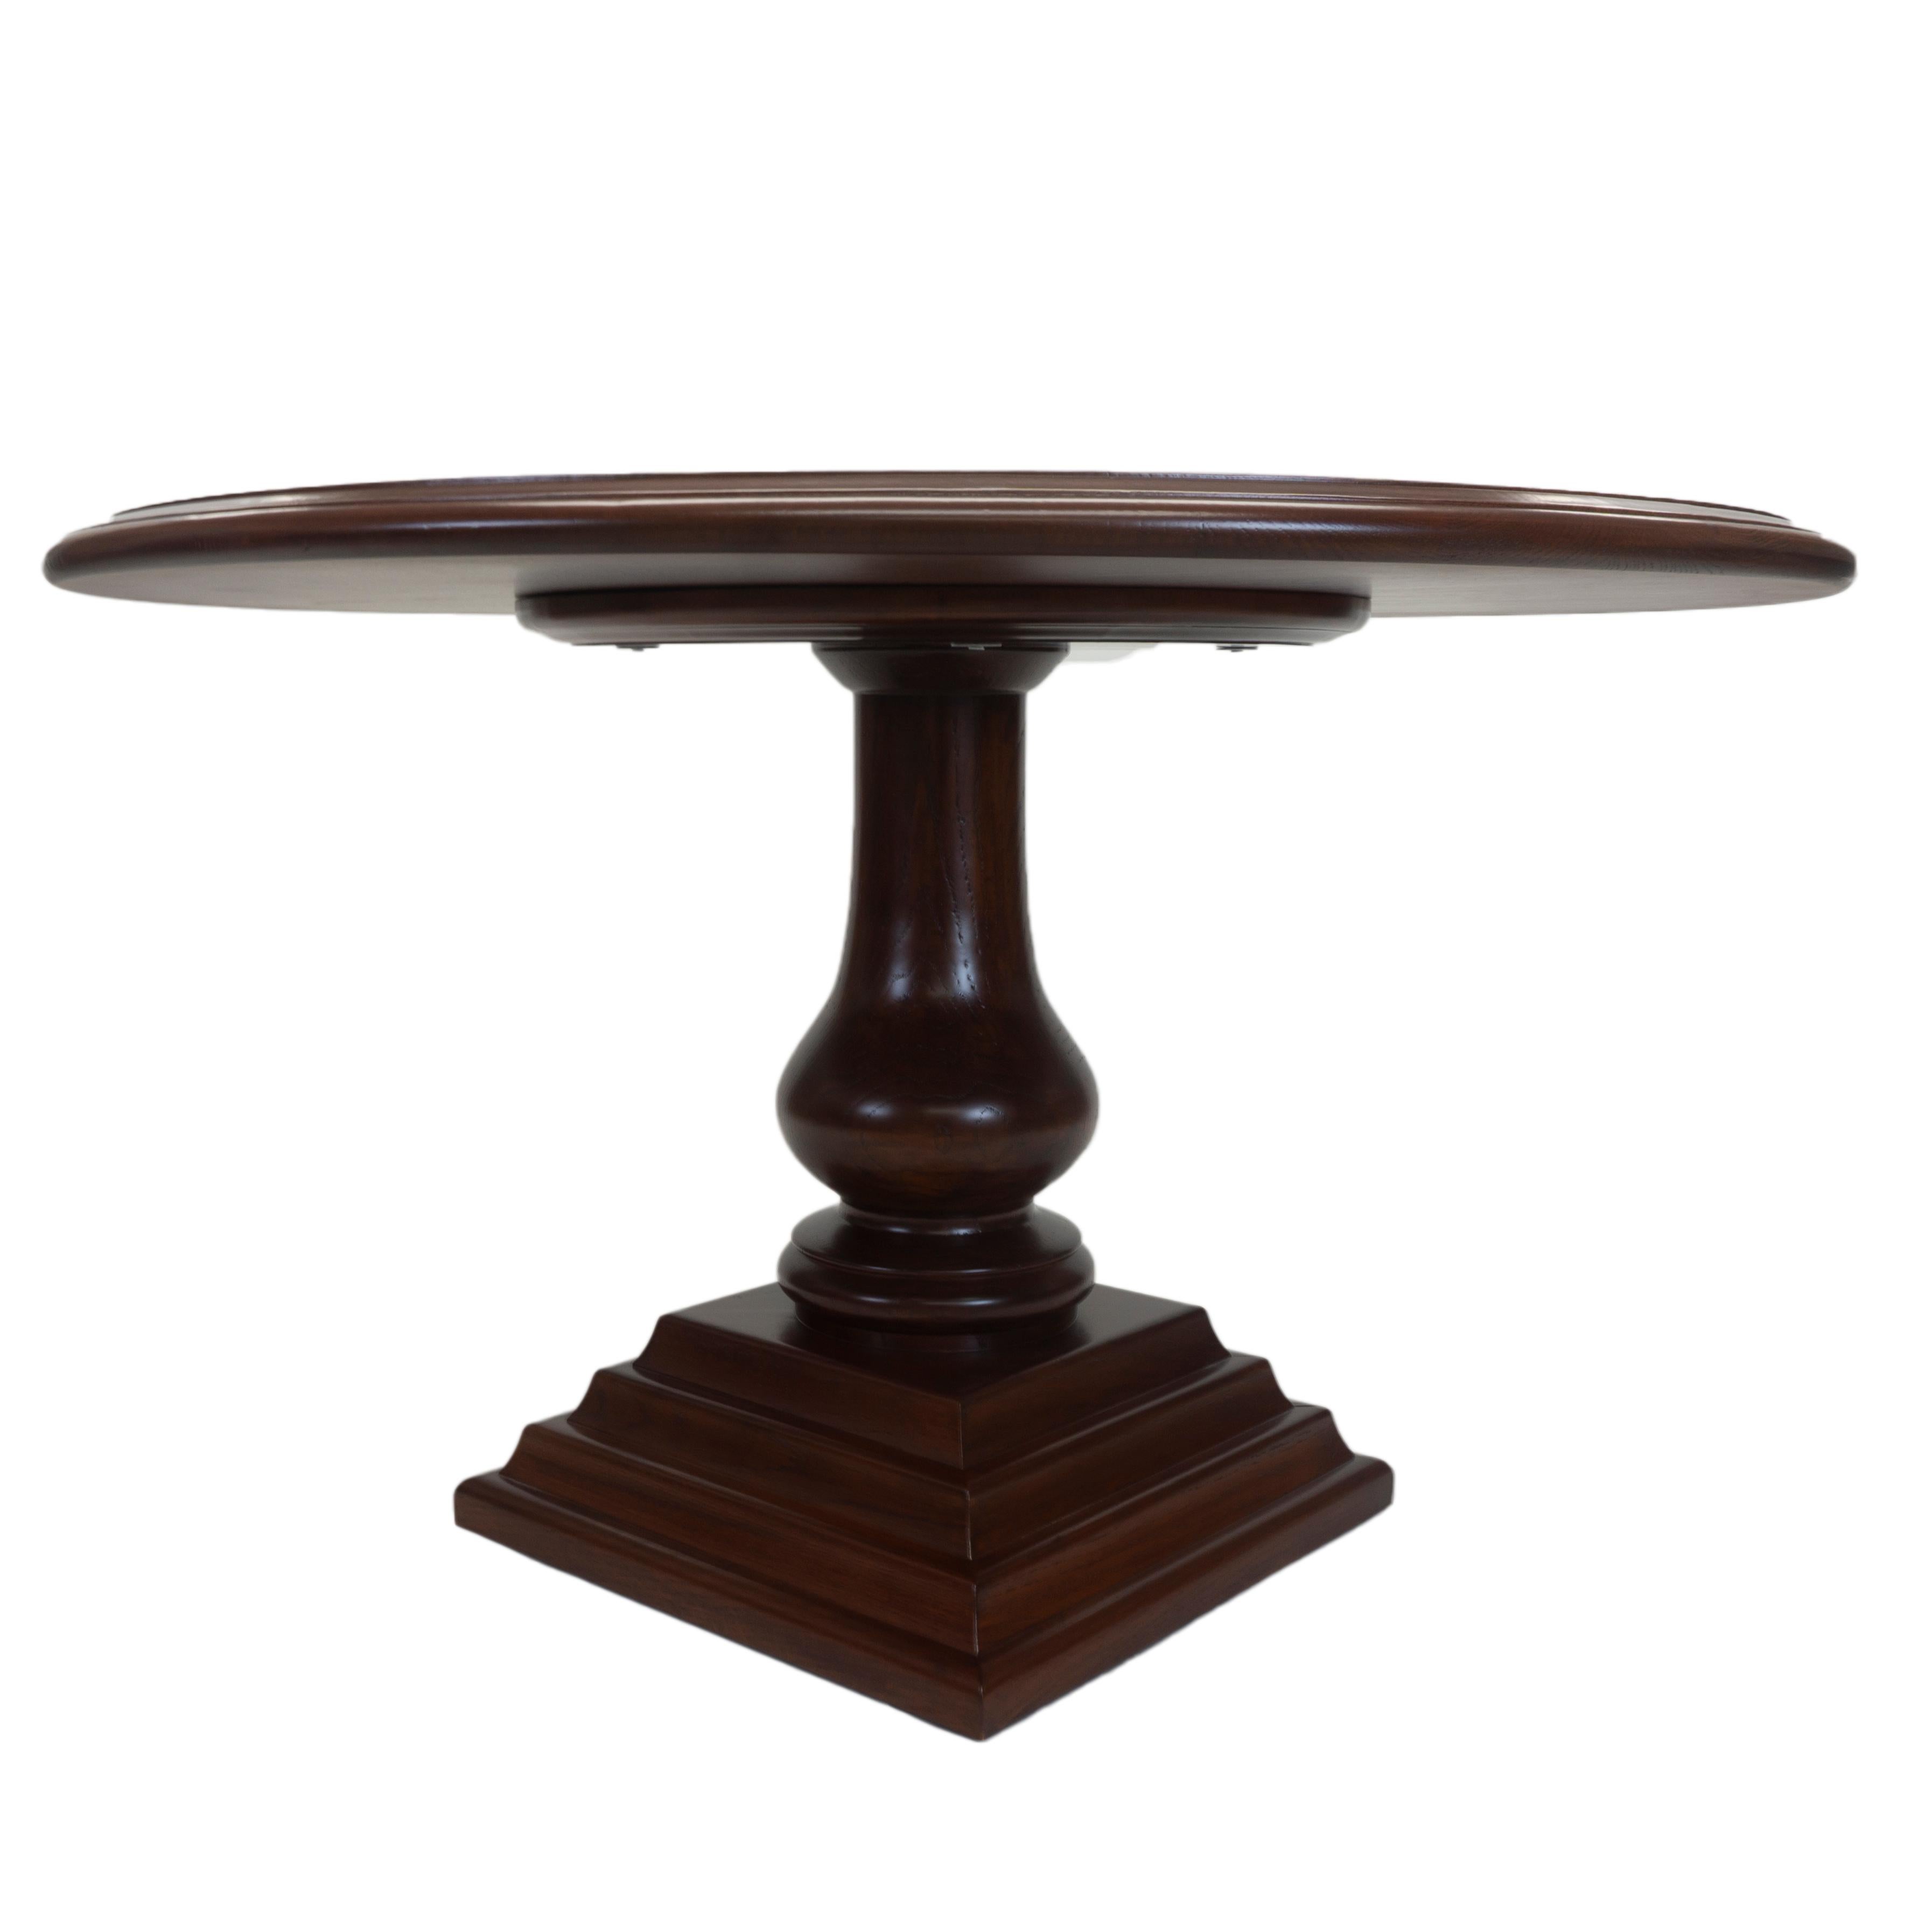 A traditional round dining table. The table features a grooved rim that sits atop a turned pedestal base. Constructed out of sturdy oak and finished in a rich dark walnut. This table is built to order with custom specifications upon request.